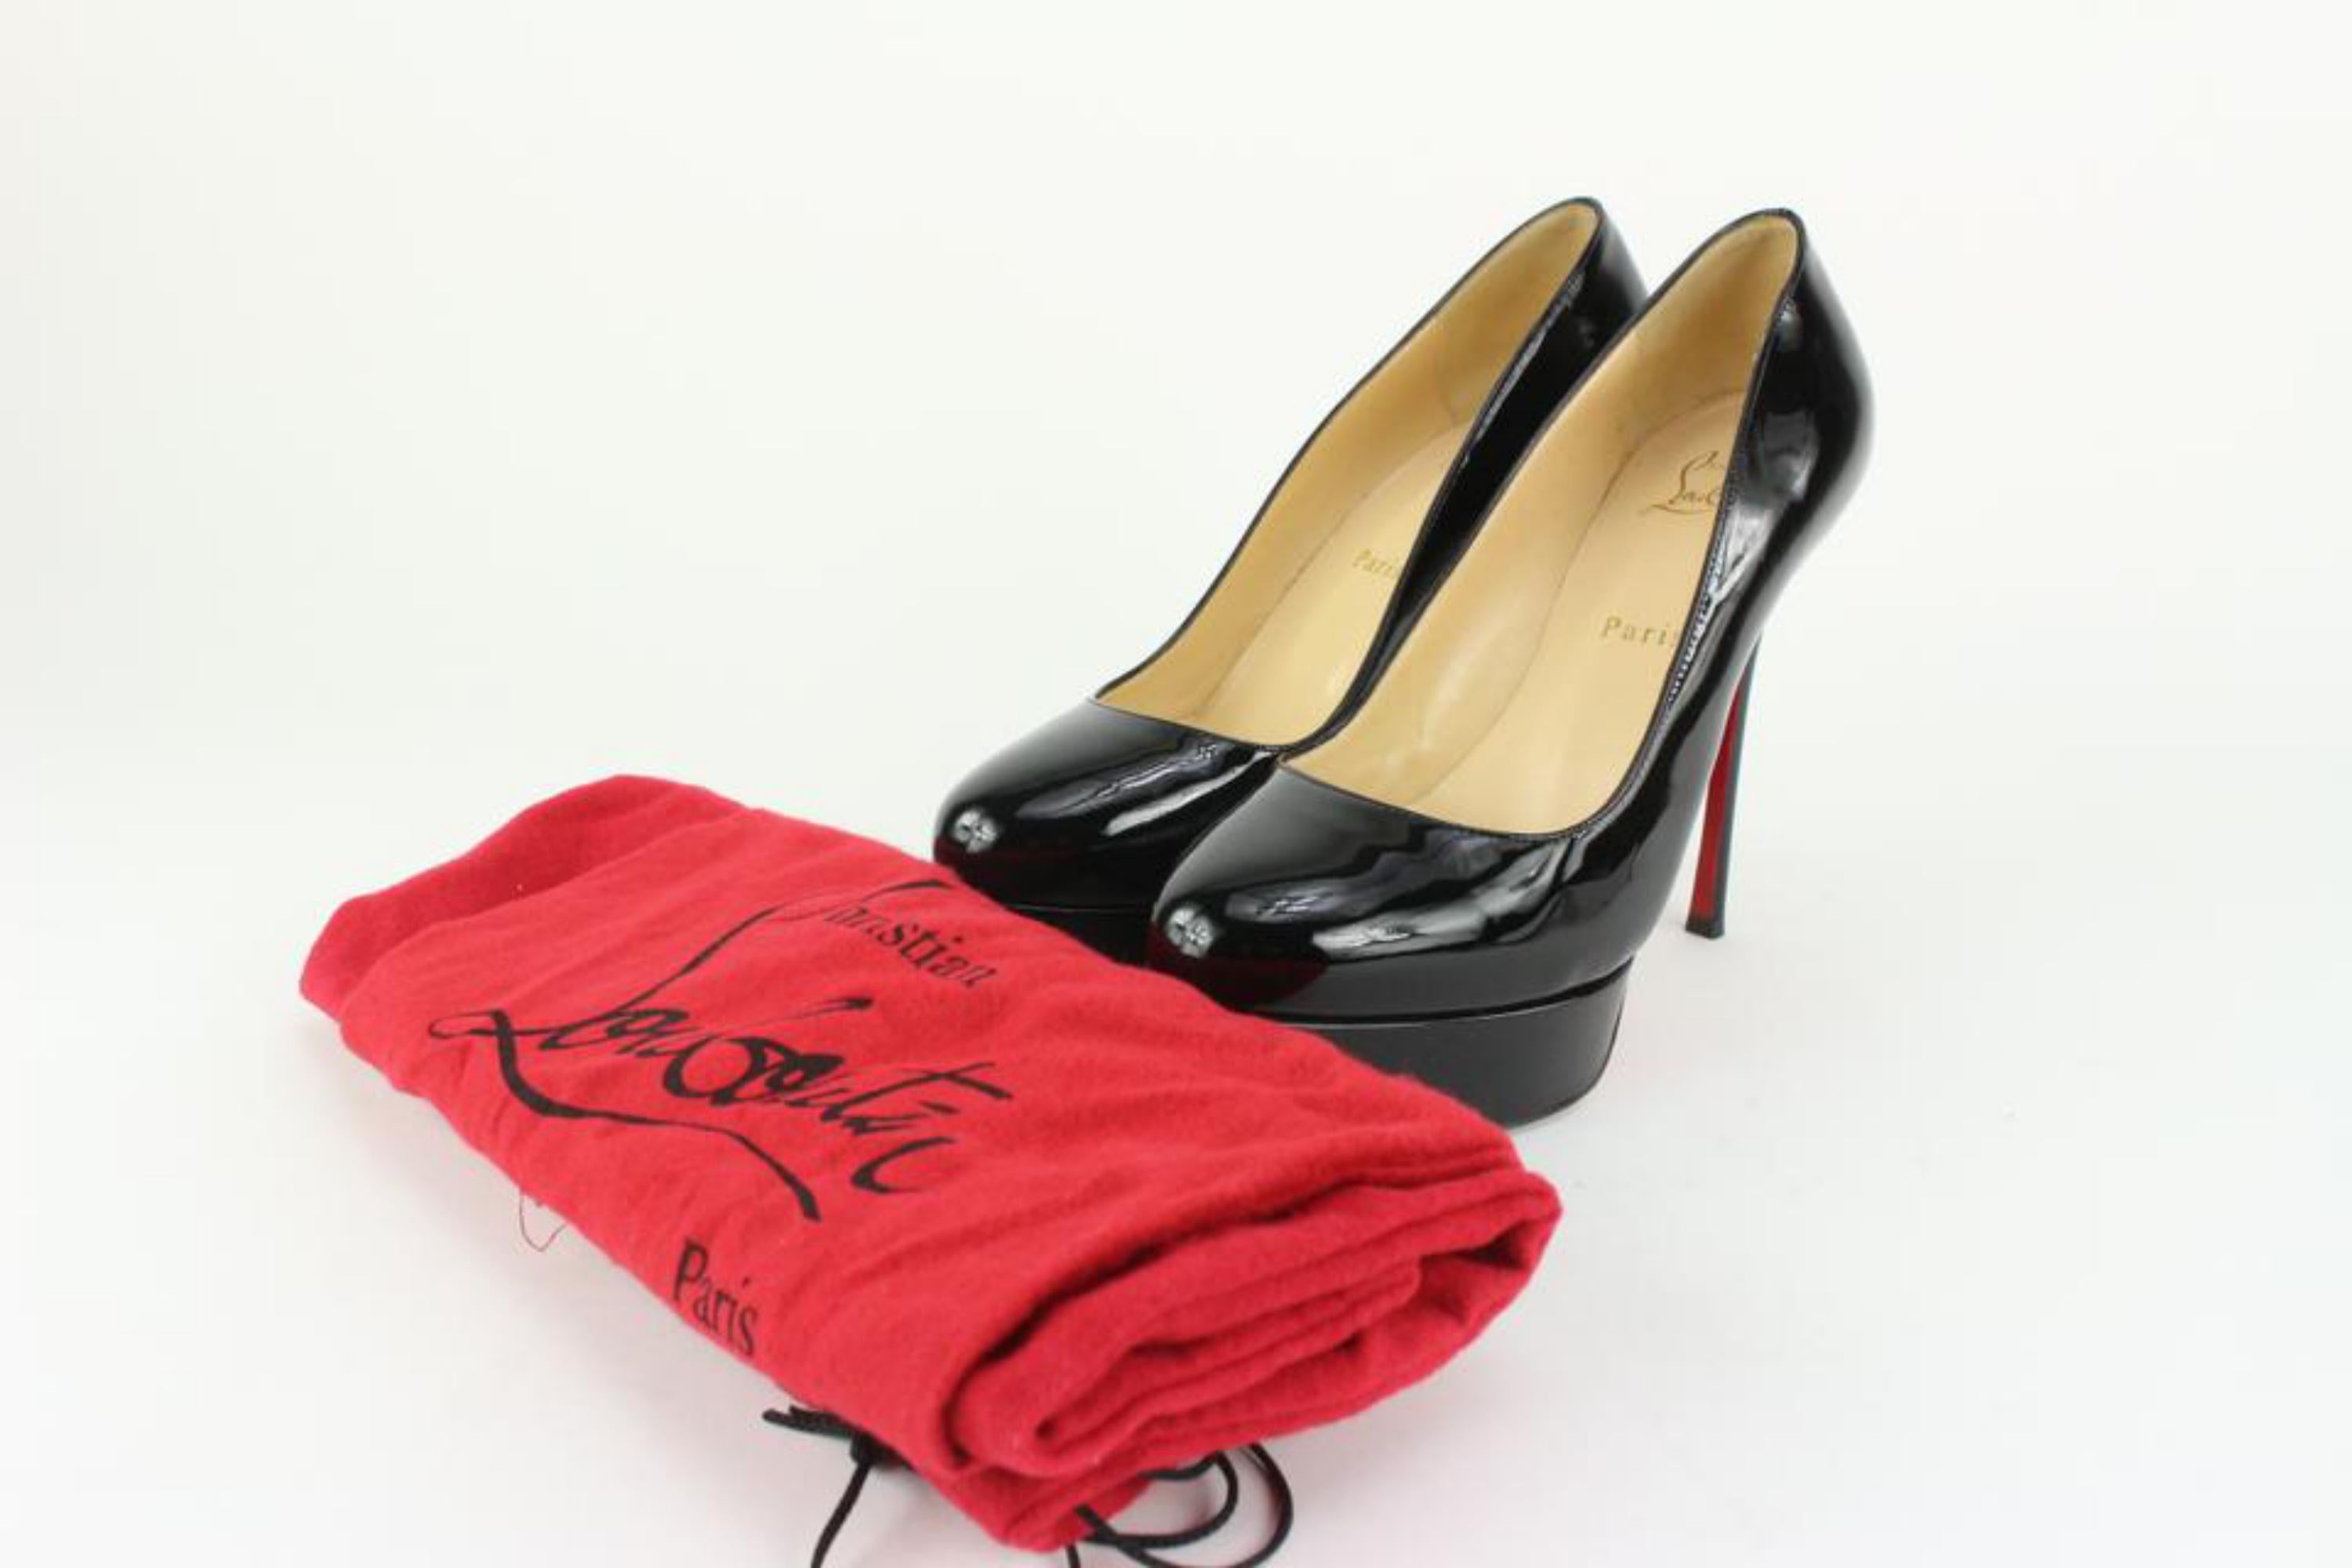 Christian Louboutin Women's 38.5 Black Patent Bianca Platform Heels 128cl34
Made In: Italy
Measurements: Length:  9.2